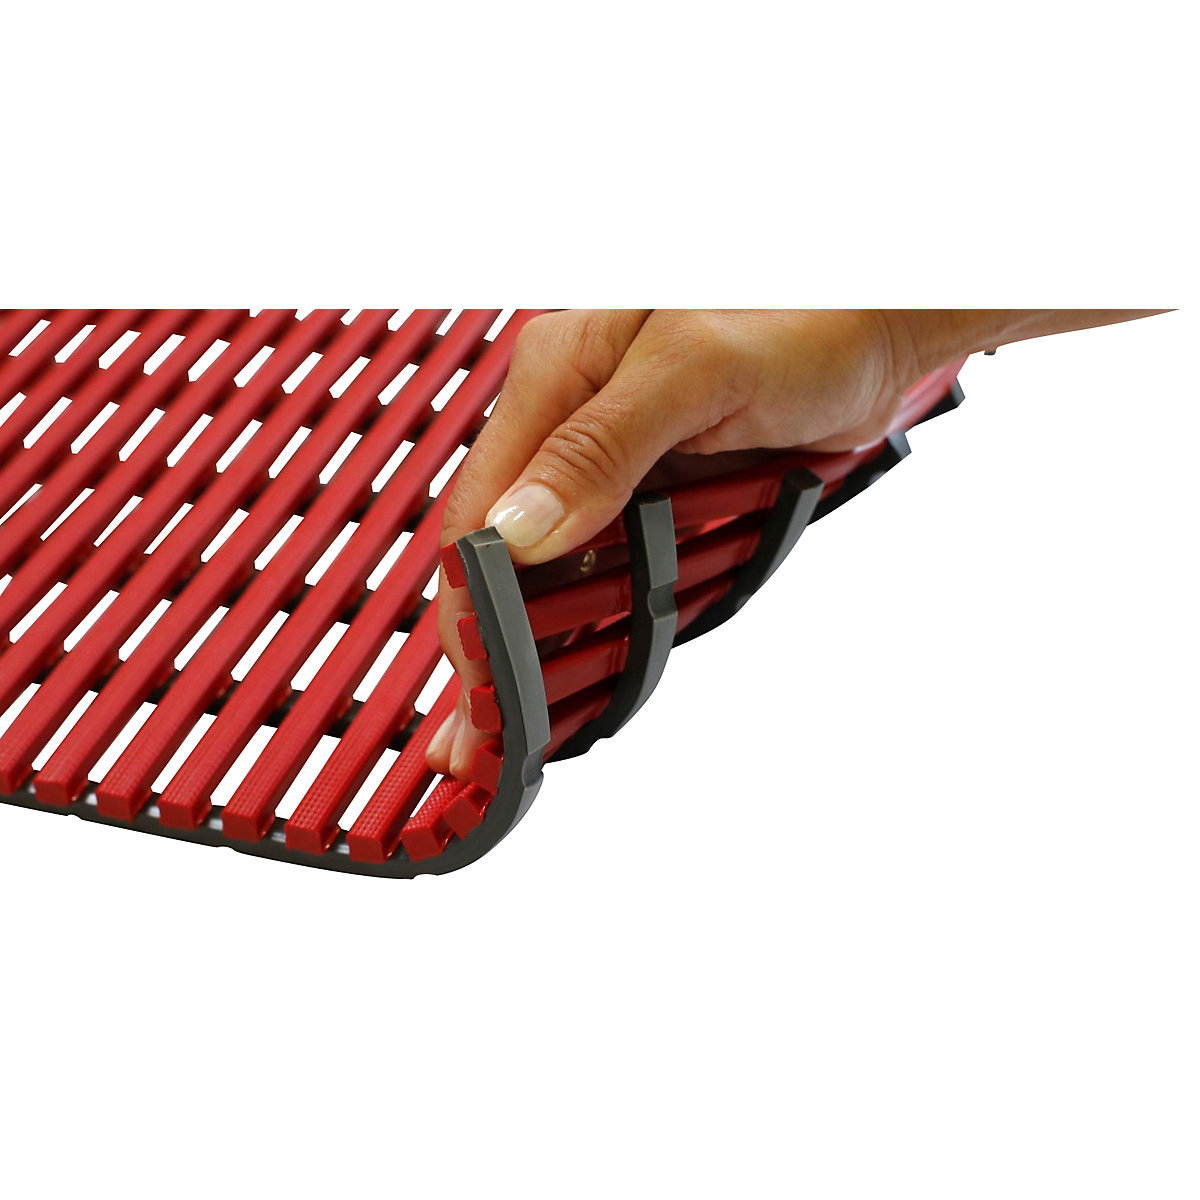 Wet room mat, anti-bacterial, 10 m roll, red, width 600 mm